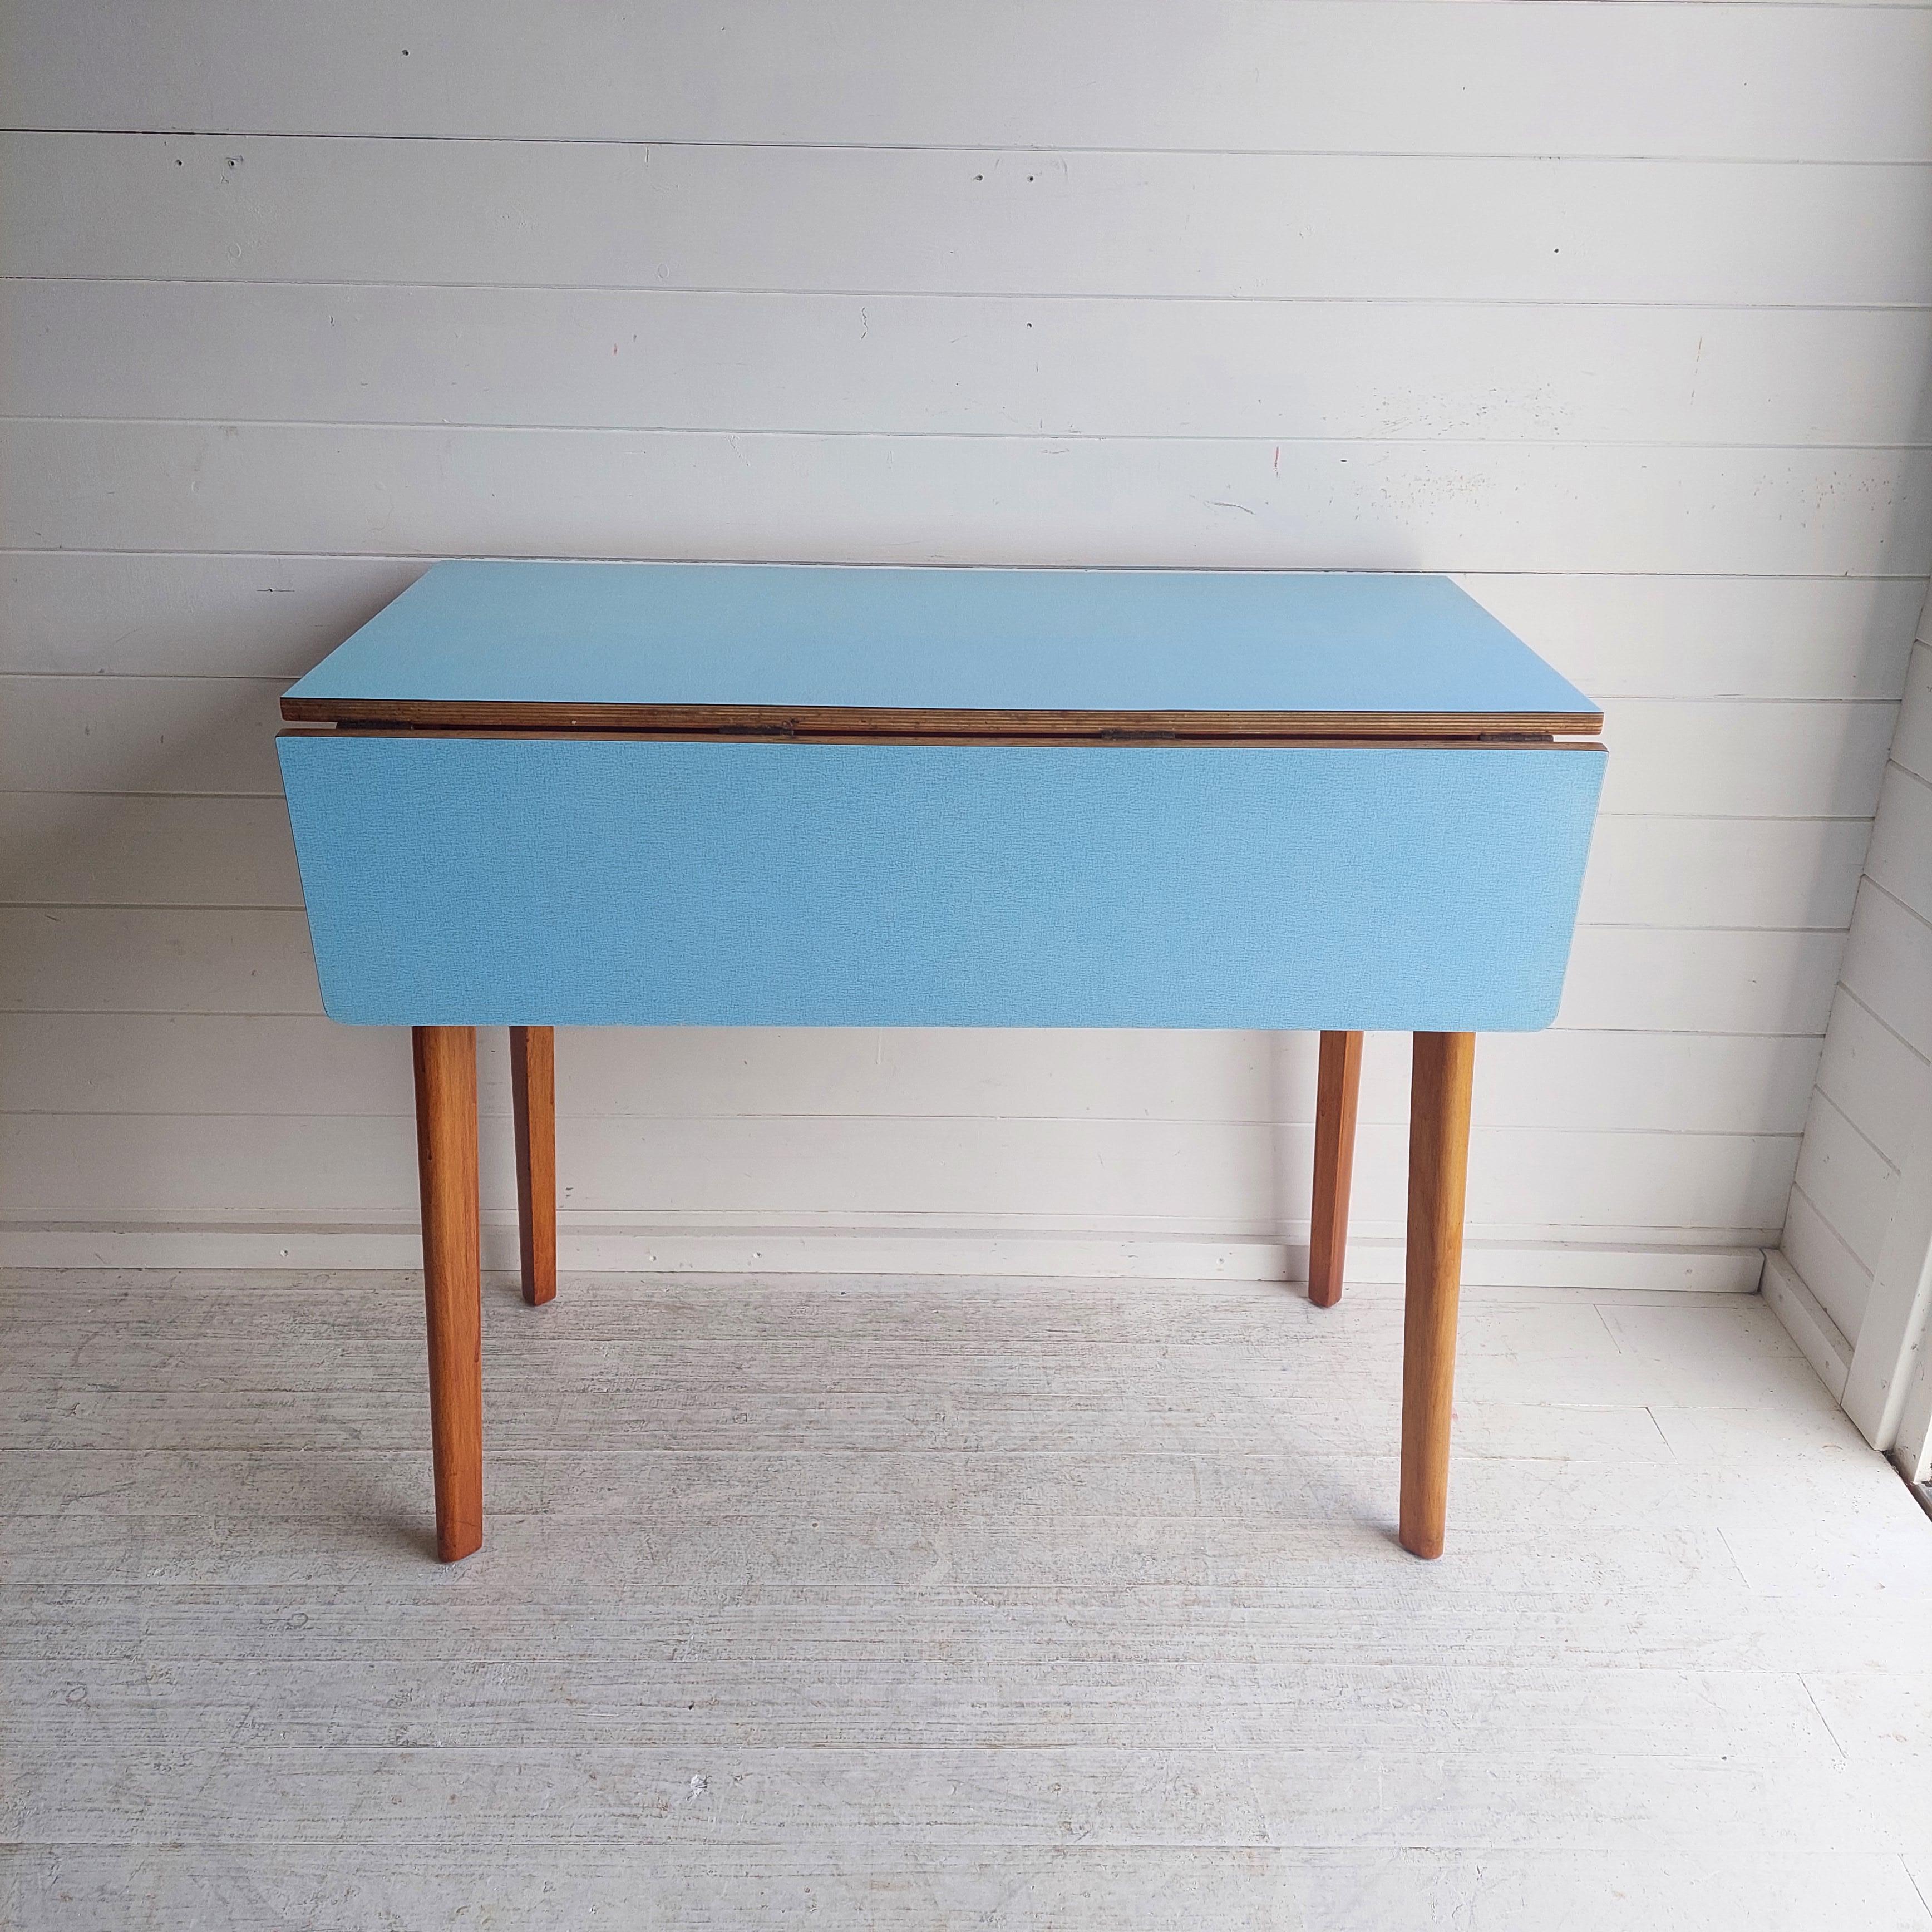 Mid Century Blue Formica Drop Leaf Kitchen Dining Table With Wooden Legs 60s In Good Condition For Sale In Leamington Spa, GB